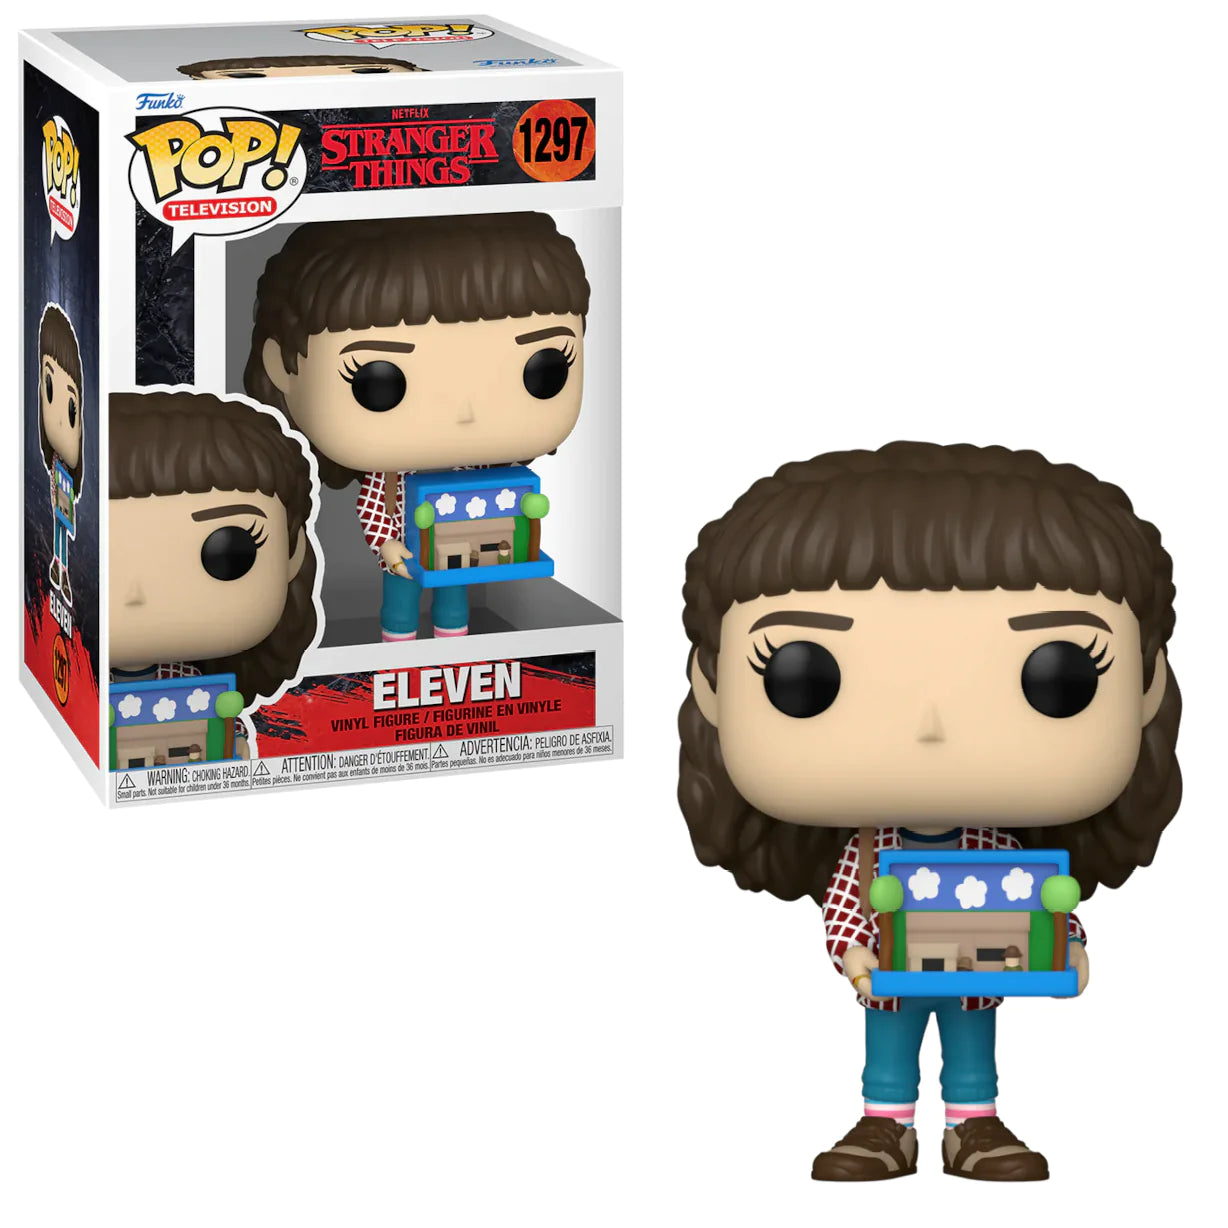 Pop! Television: Stranger Things Season 4 - Eleven with Diorama